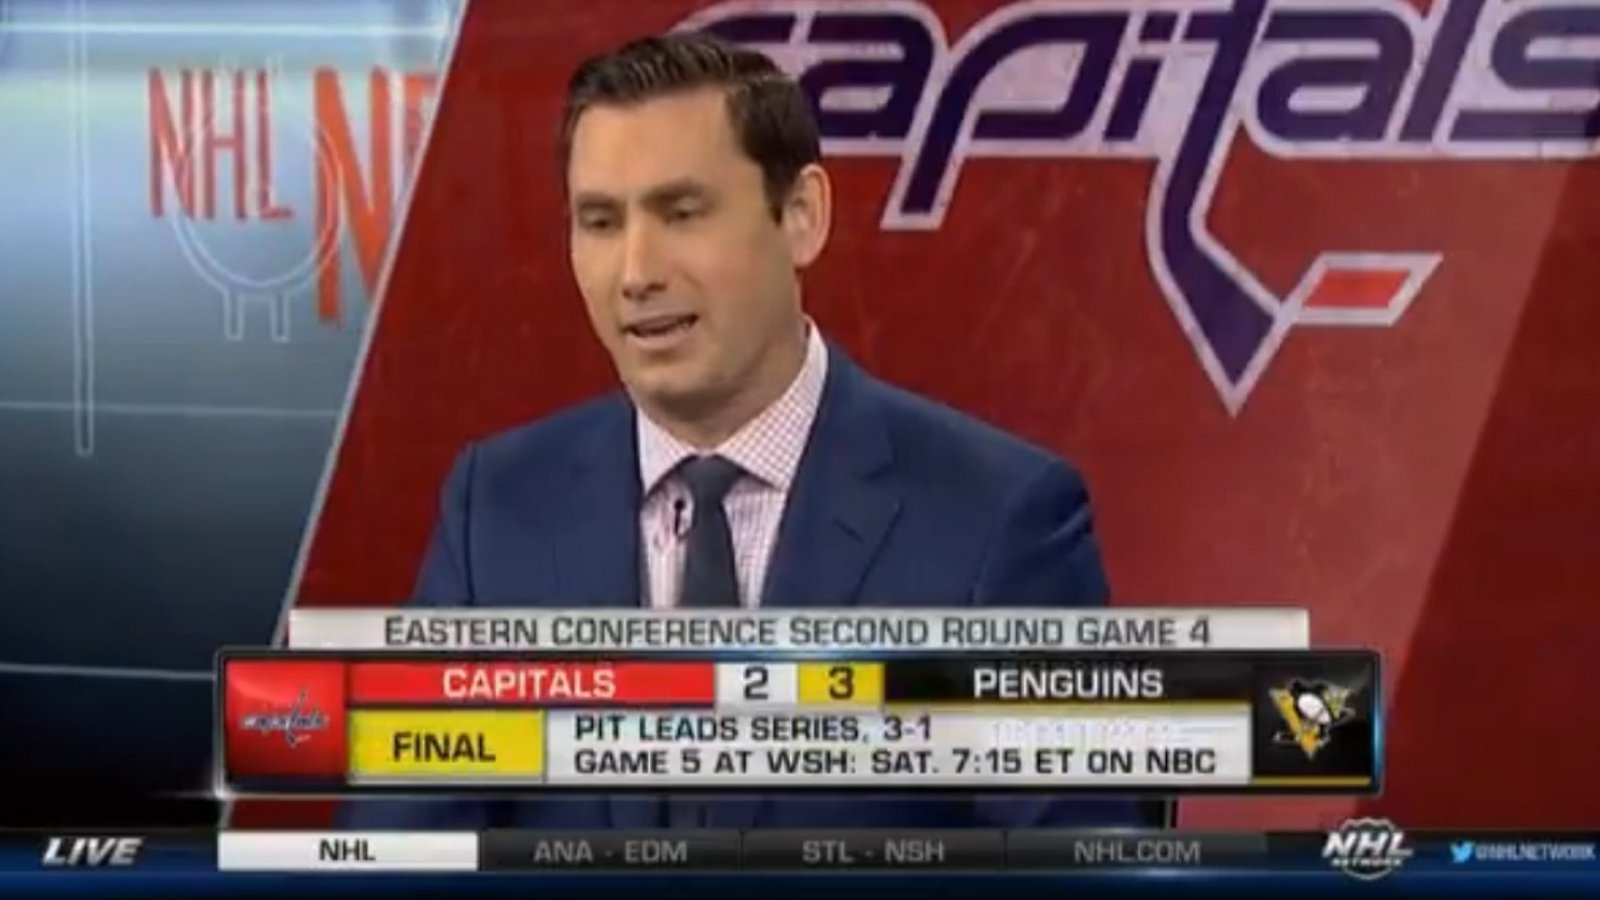 Former NHL player believes Penguins player should be suspended.